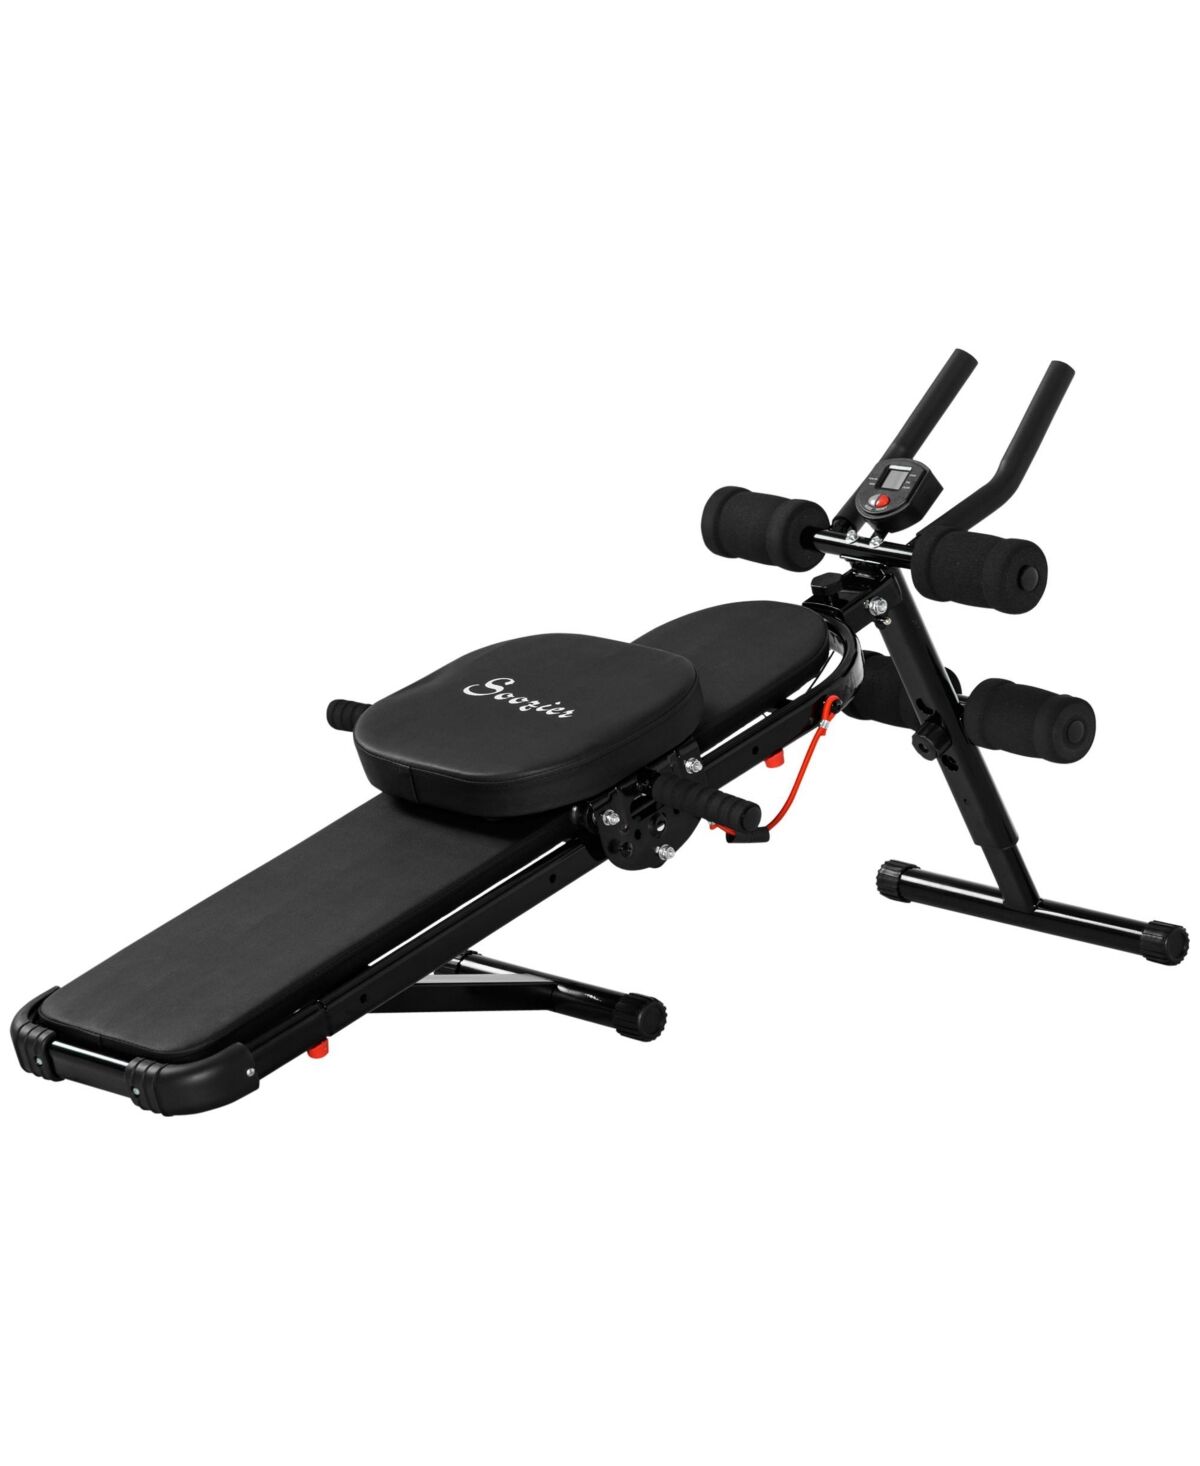 Soozier Multi-Purpose Ab Workout Equipment Foldable Sit Up Bench Adjustable Weight Bench Full Body Strength Abdominal Exercise Machine Cruncher Home G